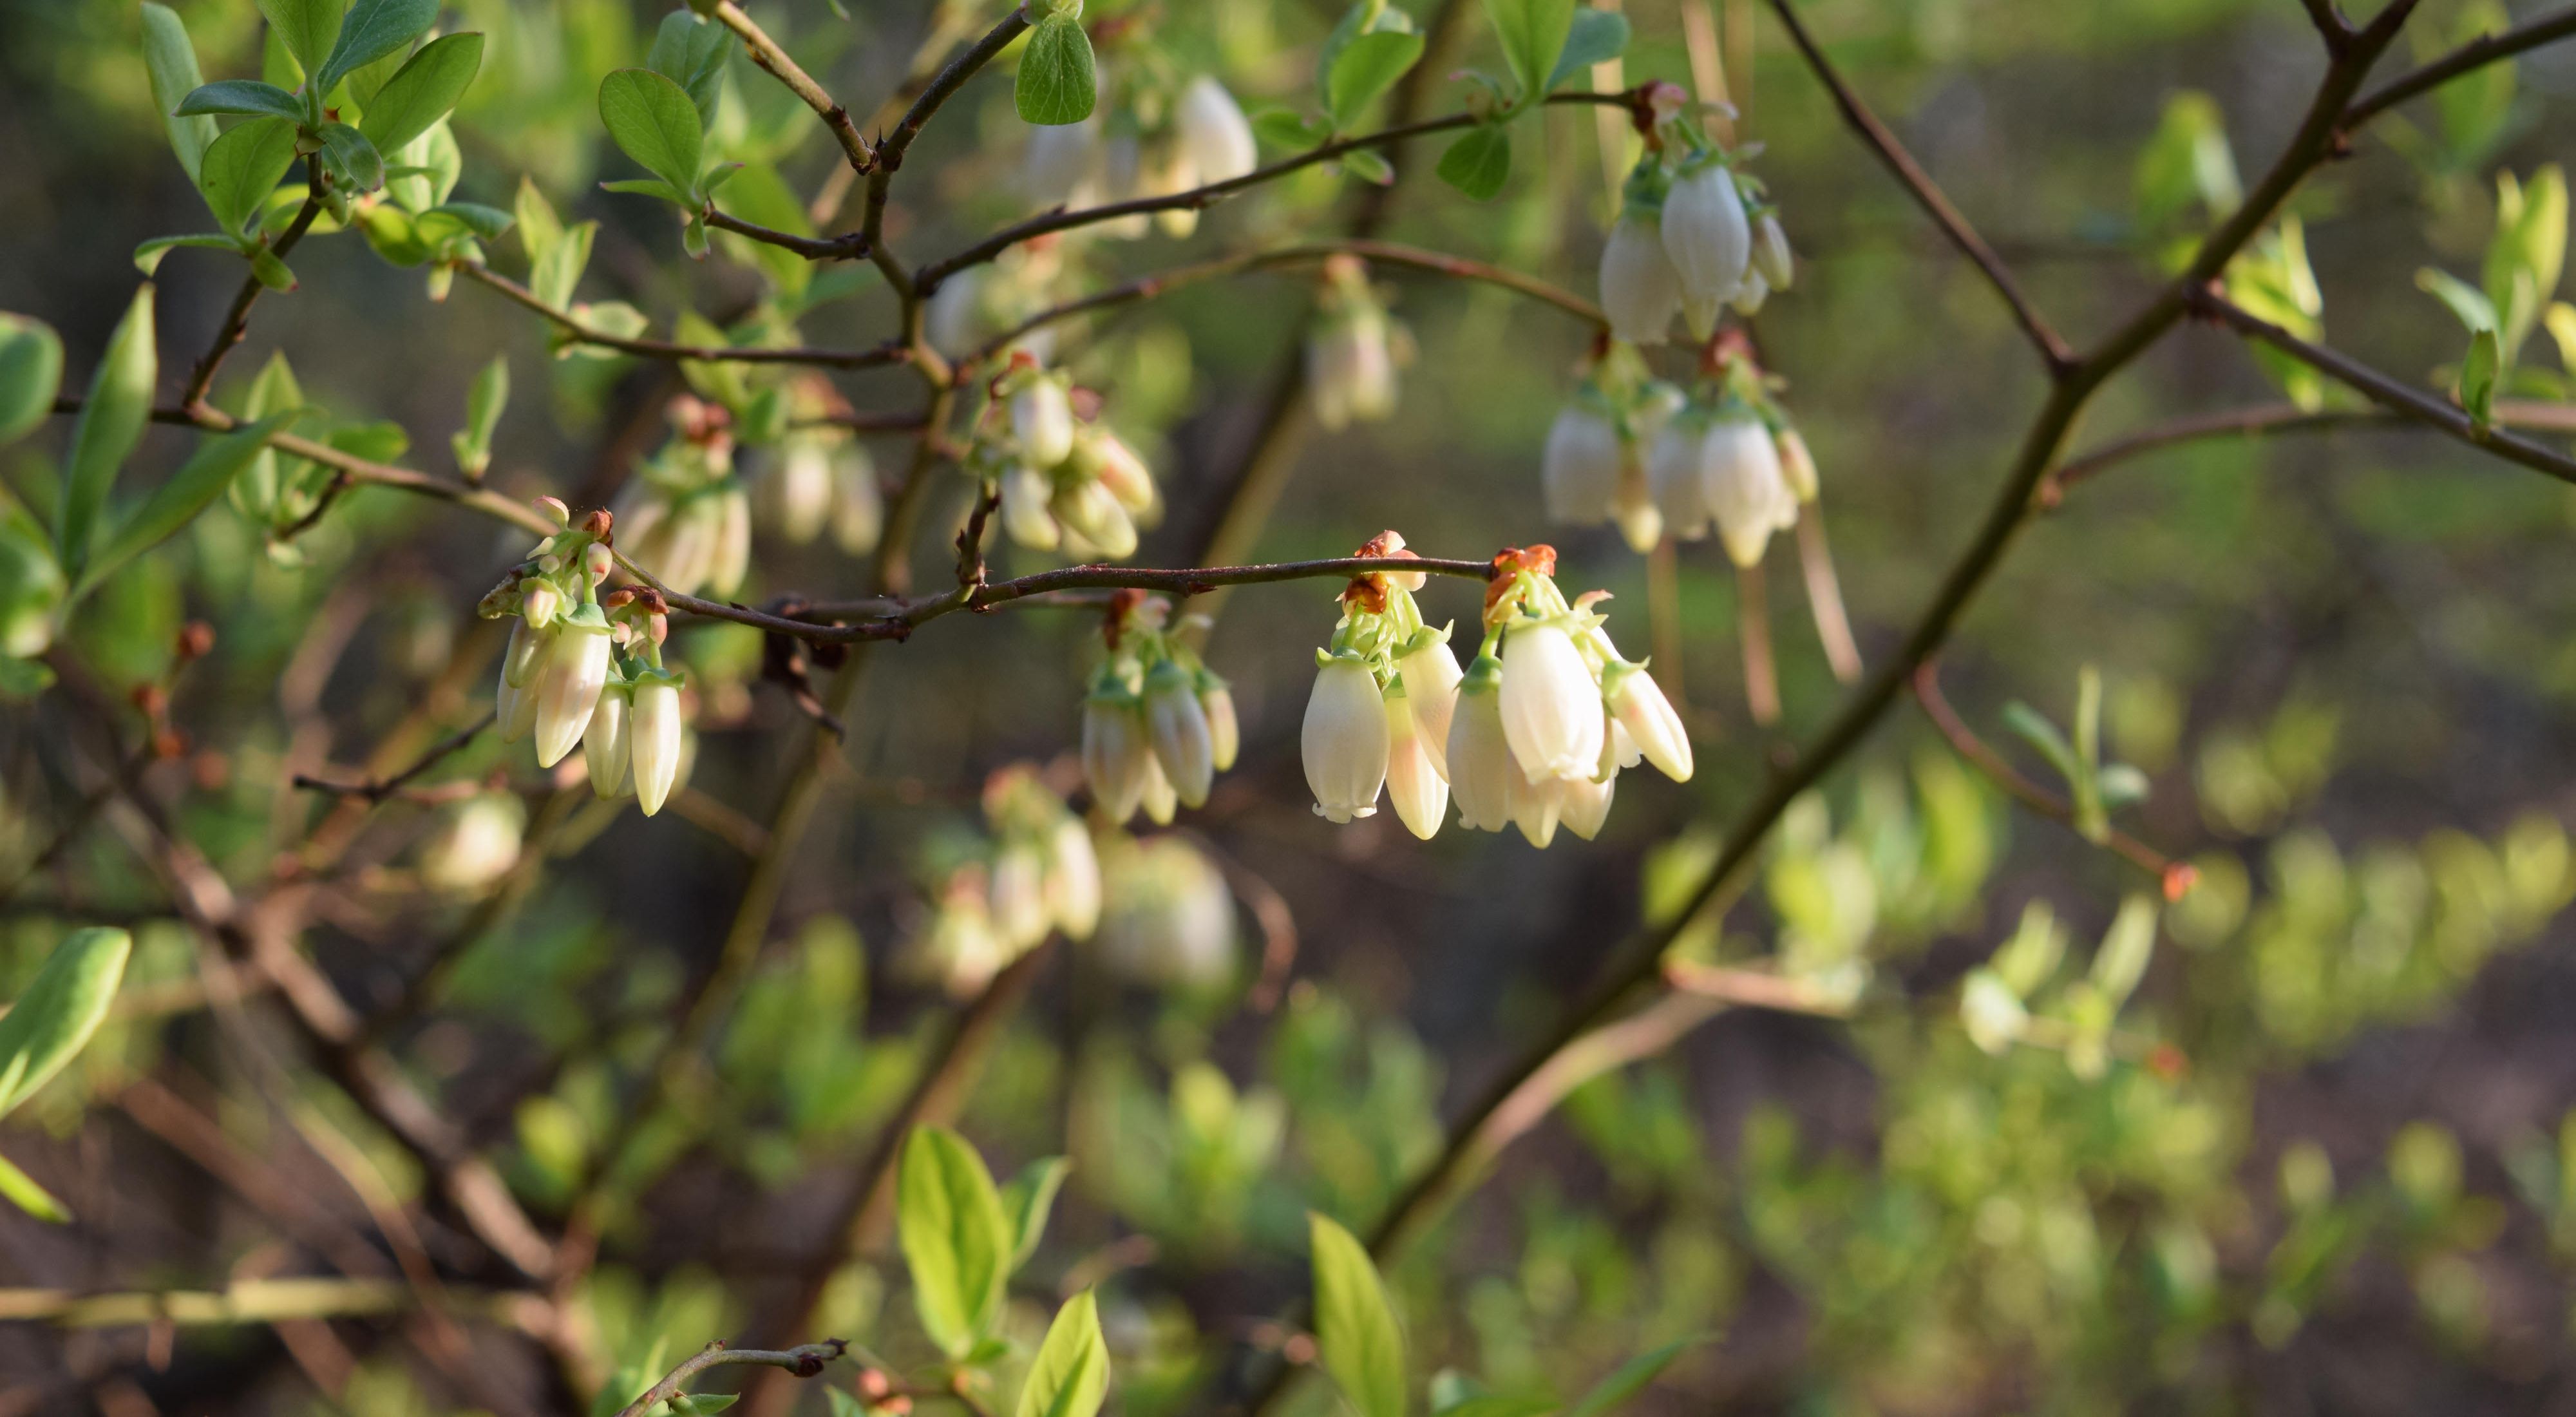 Delicate white blooms hang down from the ends of thin branches.